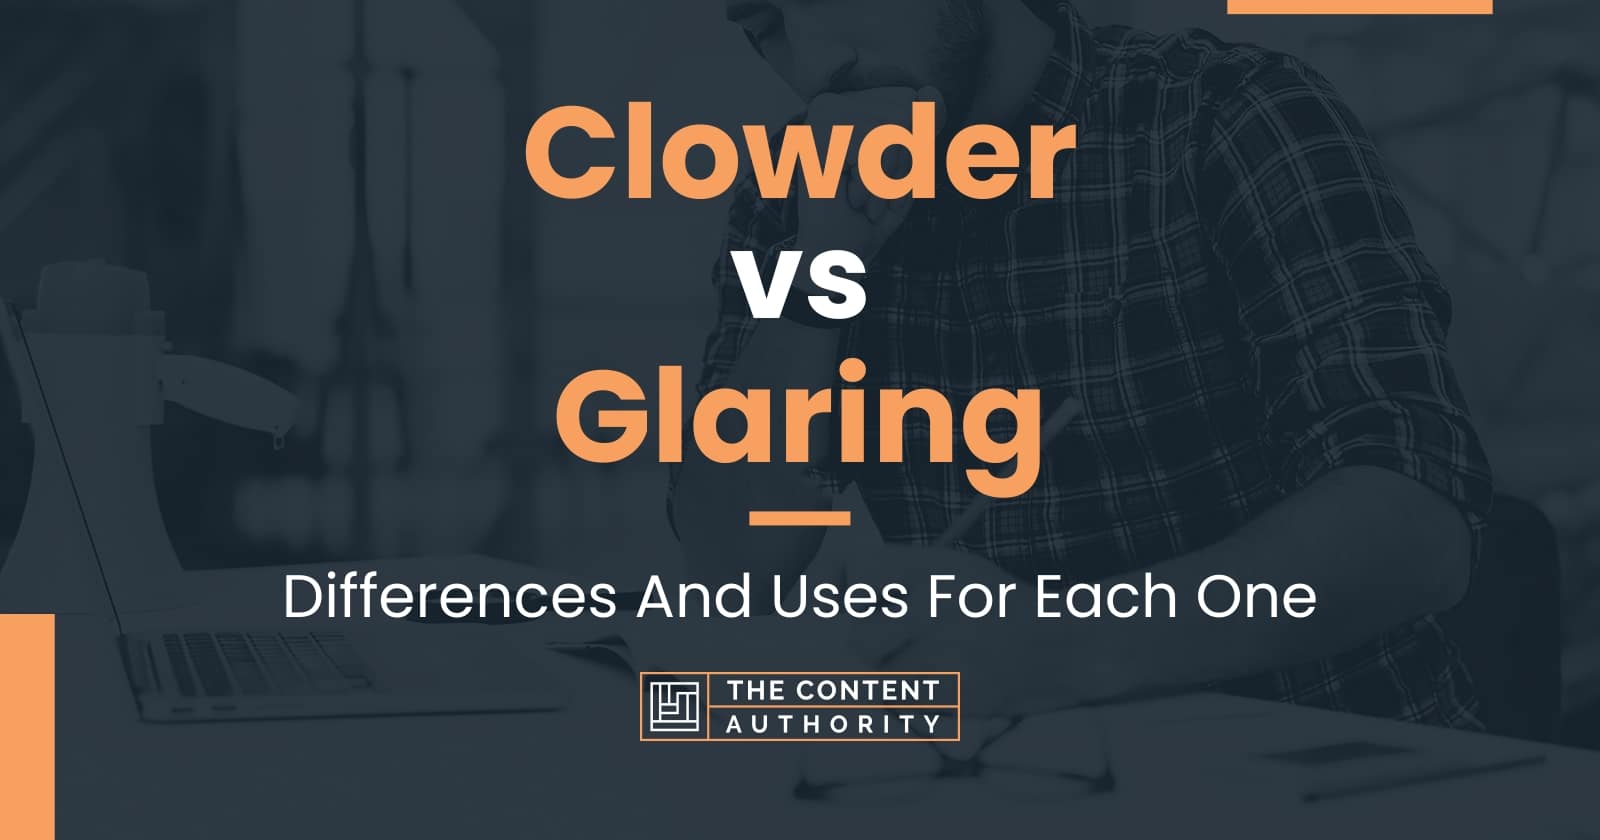 Clowder vs Glaring: Differences And Uses For Each One